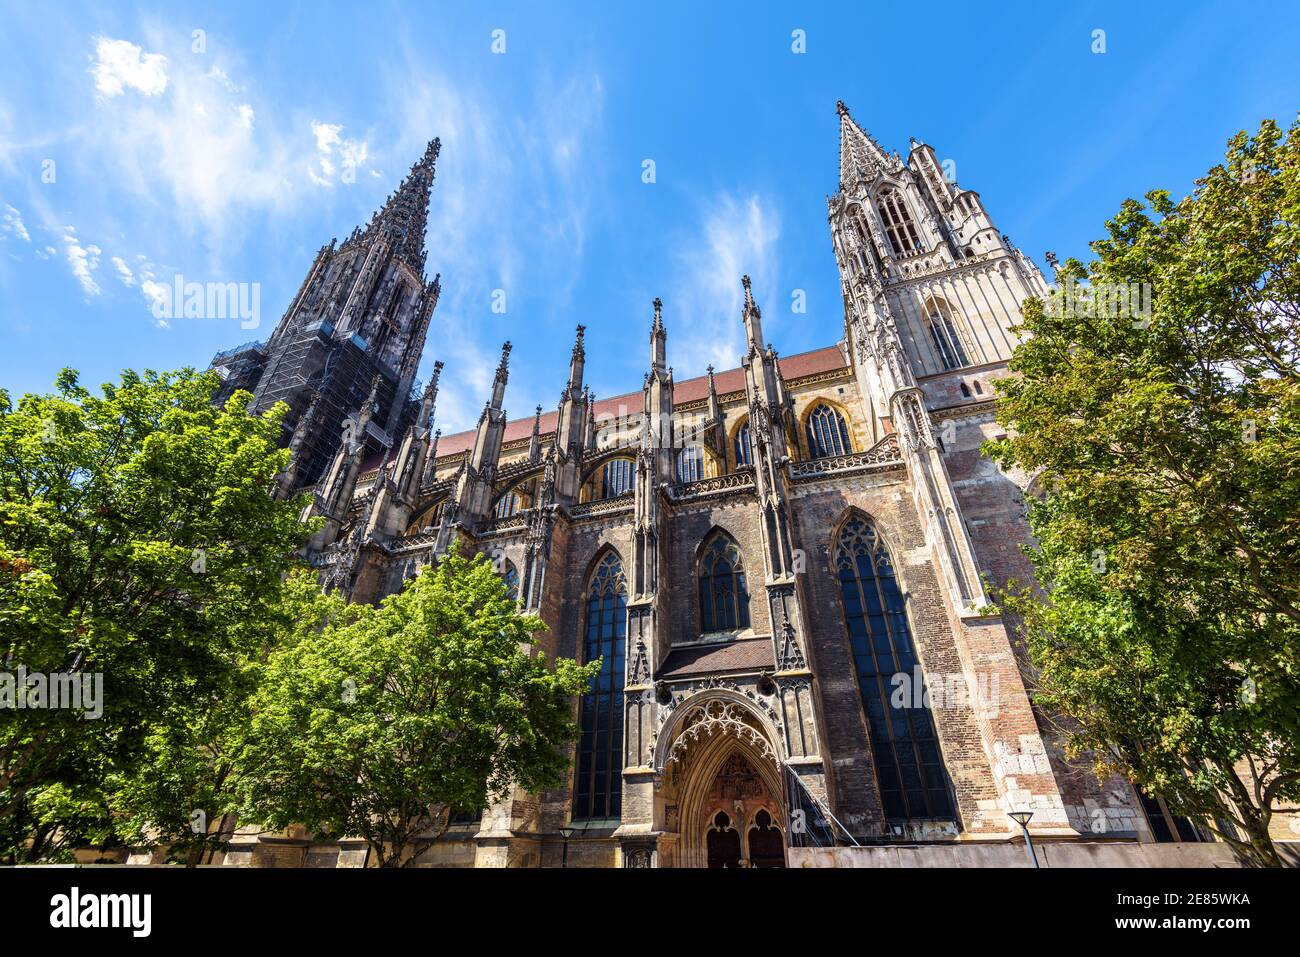 Ulm Minster or Cathedral of Ulm city, panorama of ornate Gothic church exterior, Germany. It is famous landmark of Ulm. Scenery of medieval European a Stock Photo